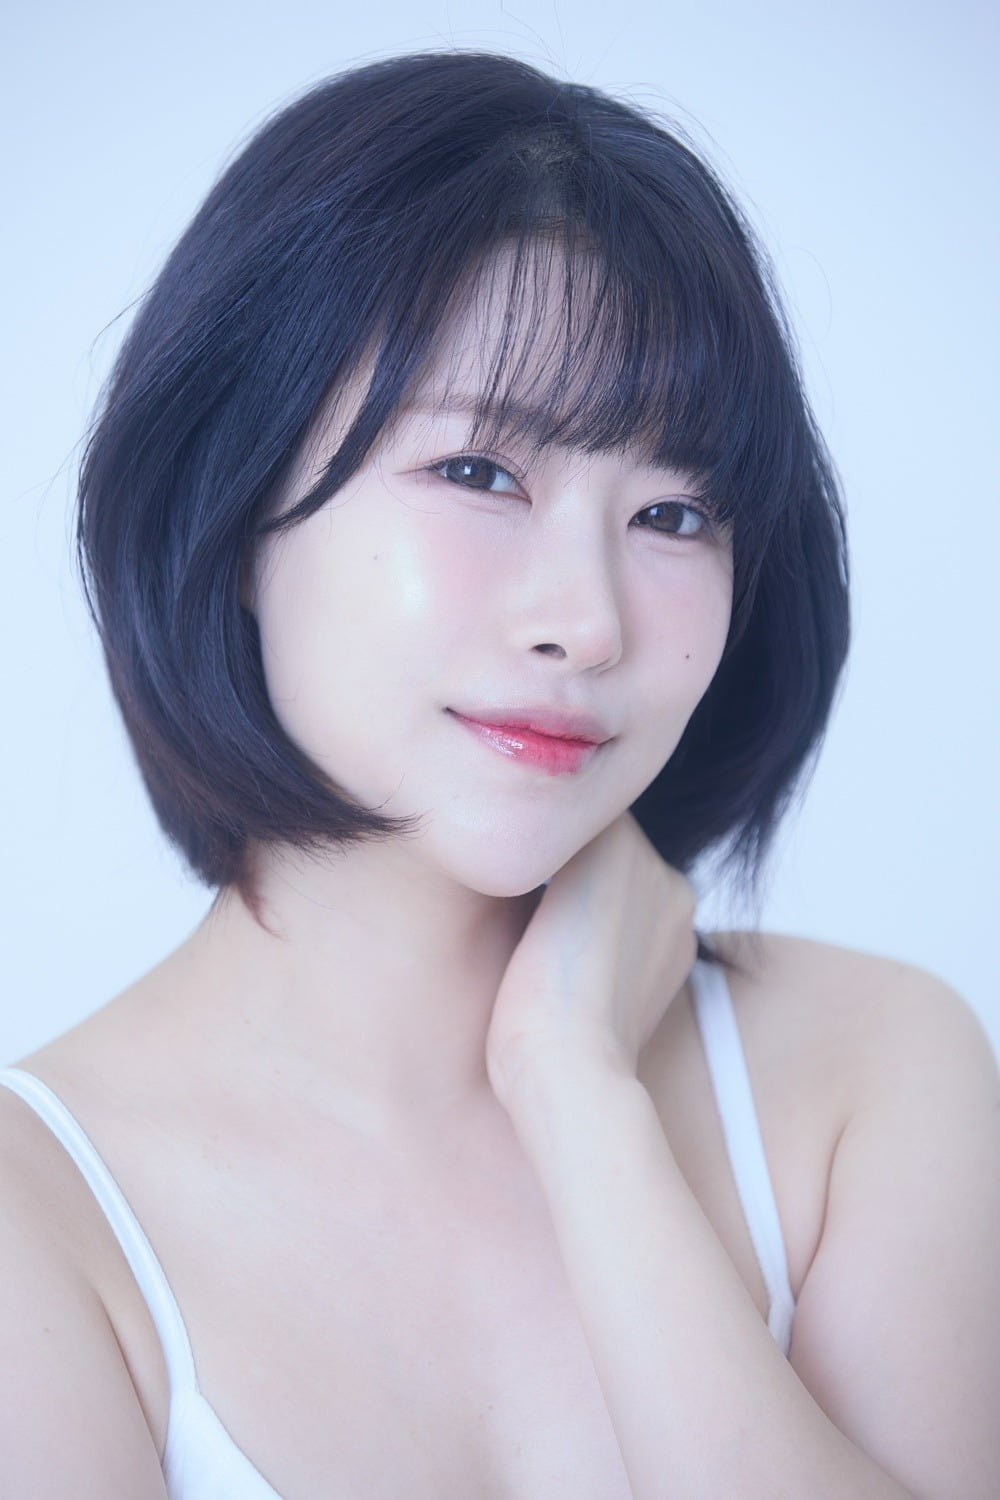 Comedian Lee Se-young, a new start